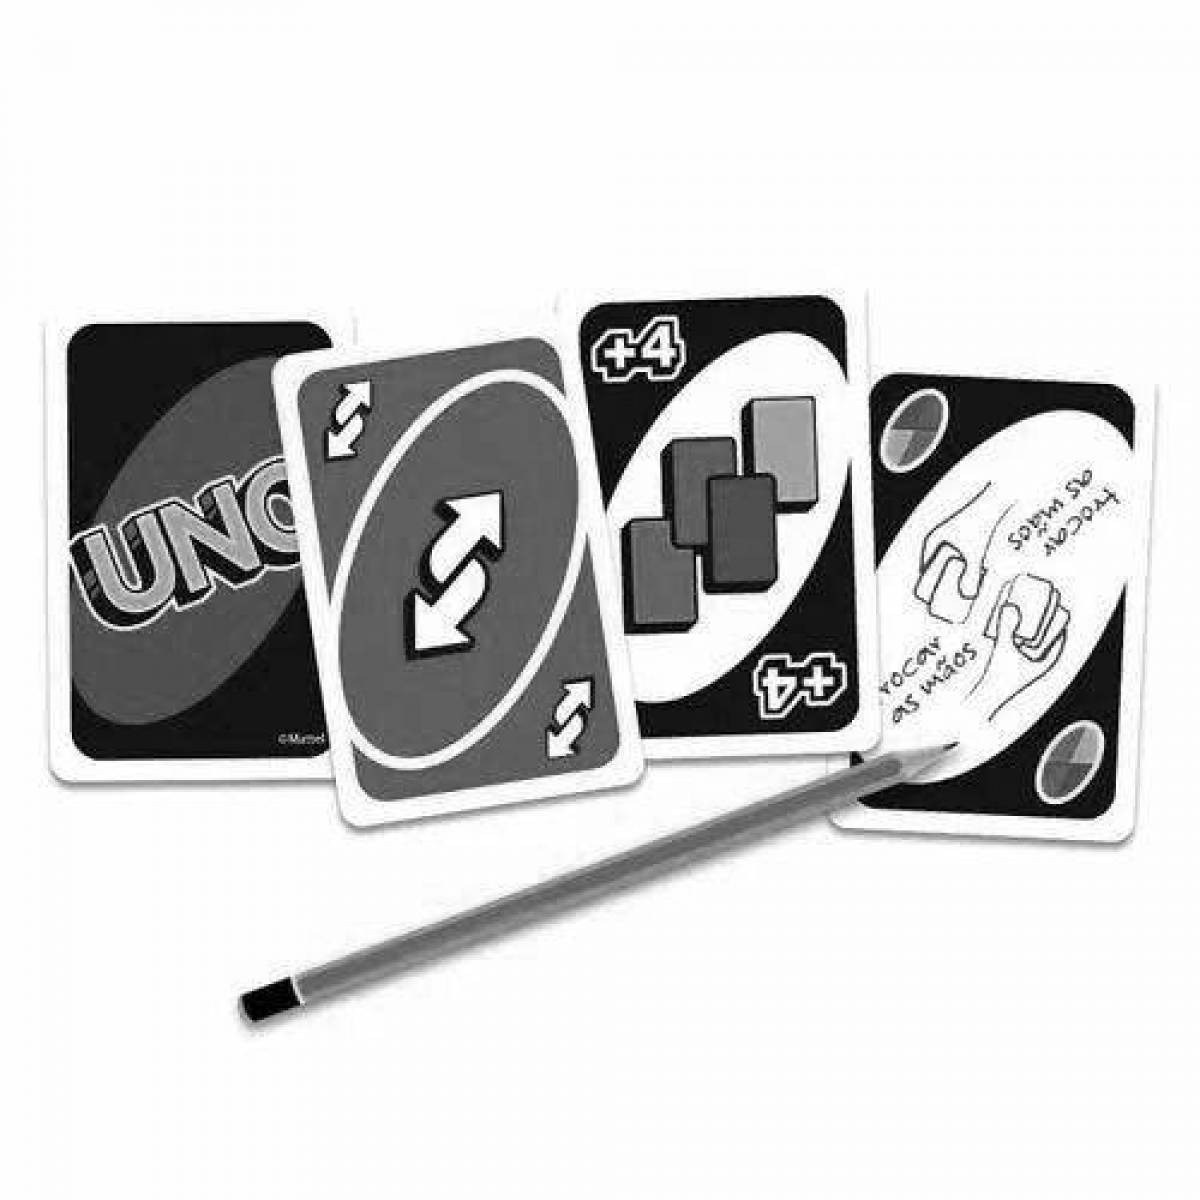 Awesome uno card coloring page